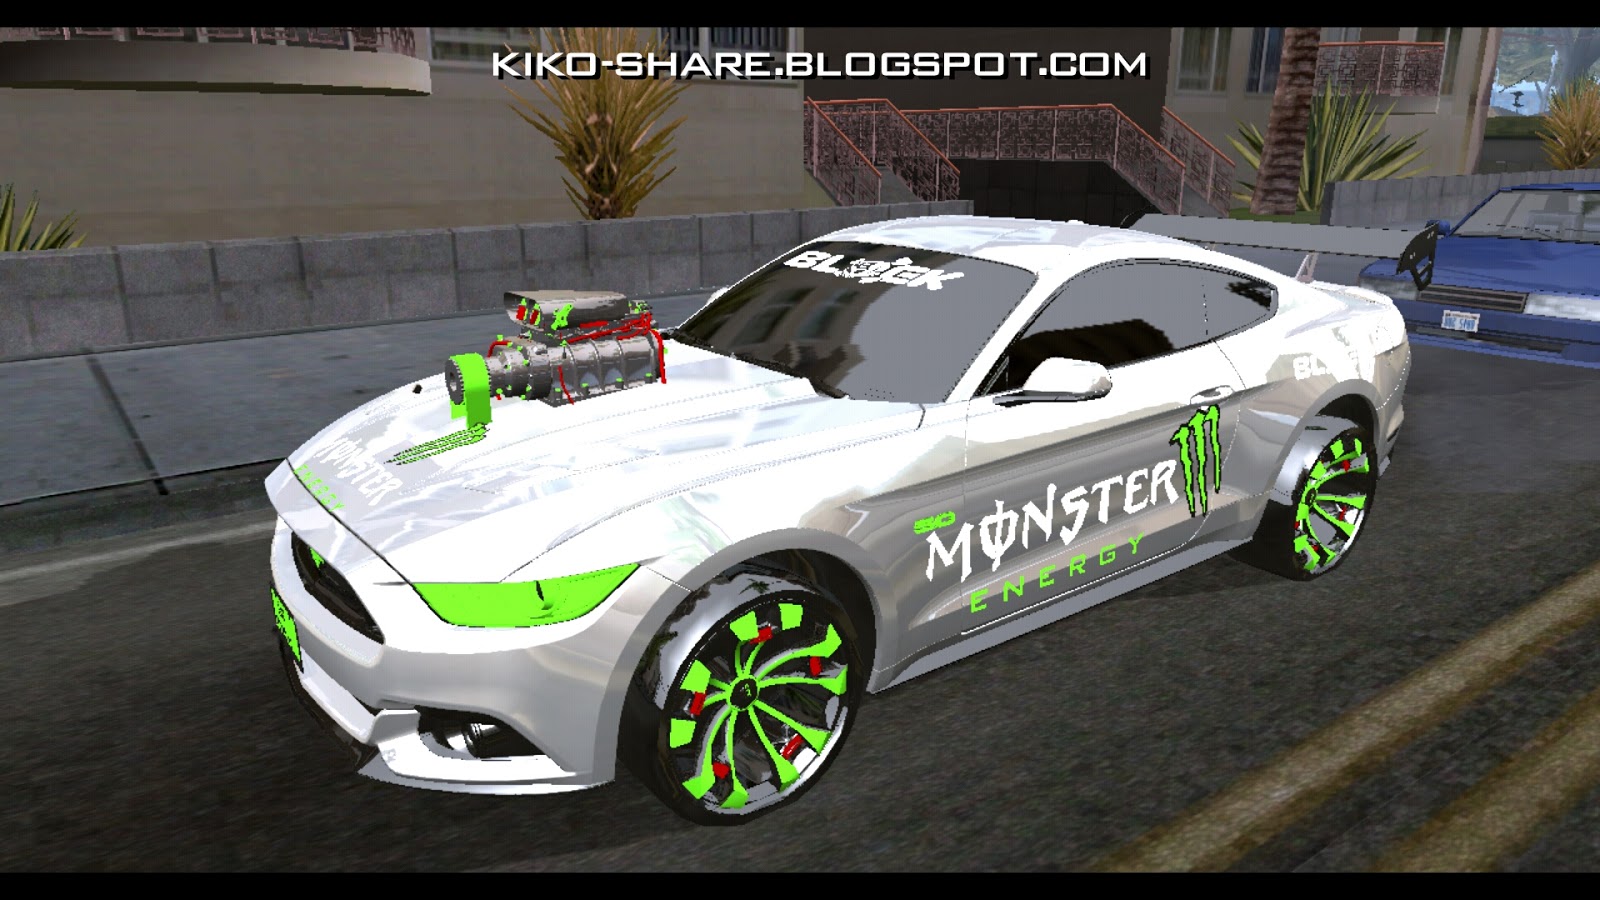 93+ Mod Mobil Indonesia Gta Sa Android Dff Only HD Terbaru